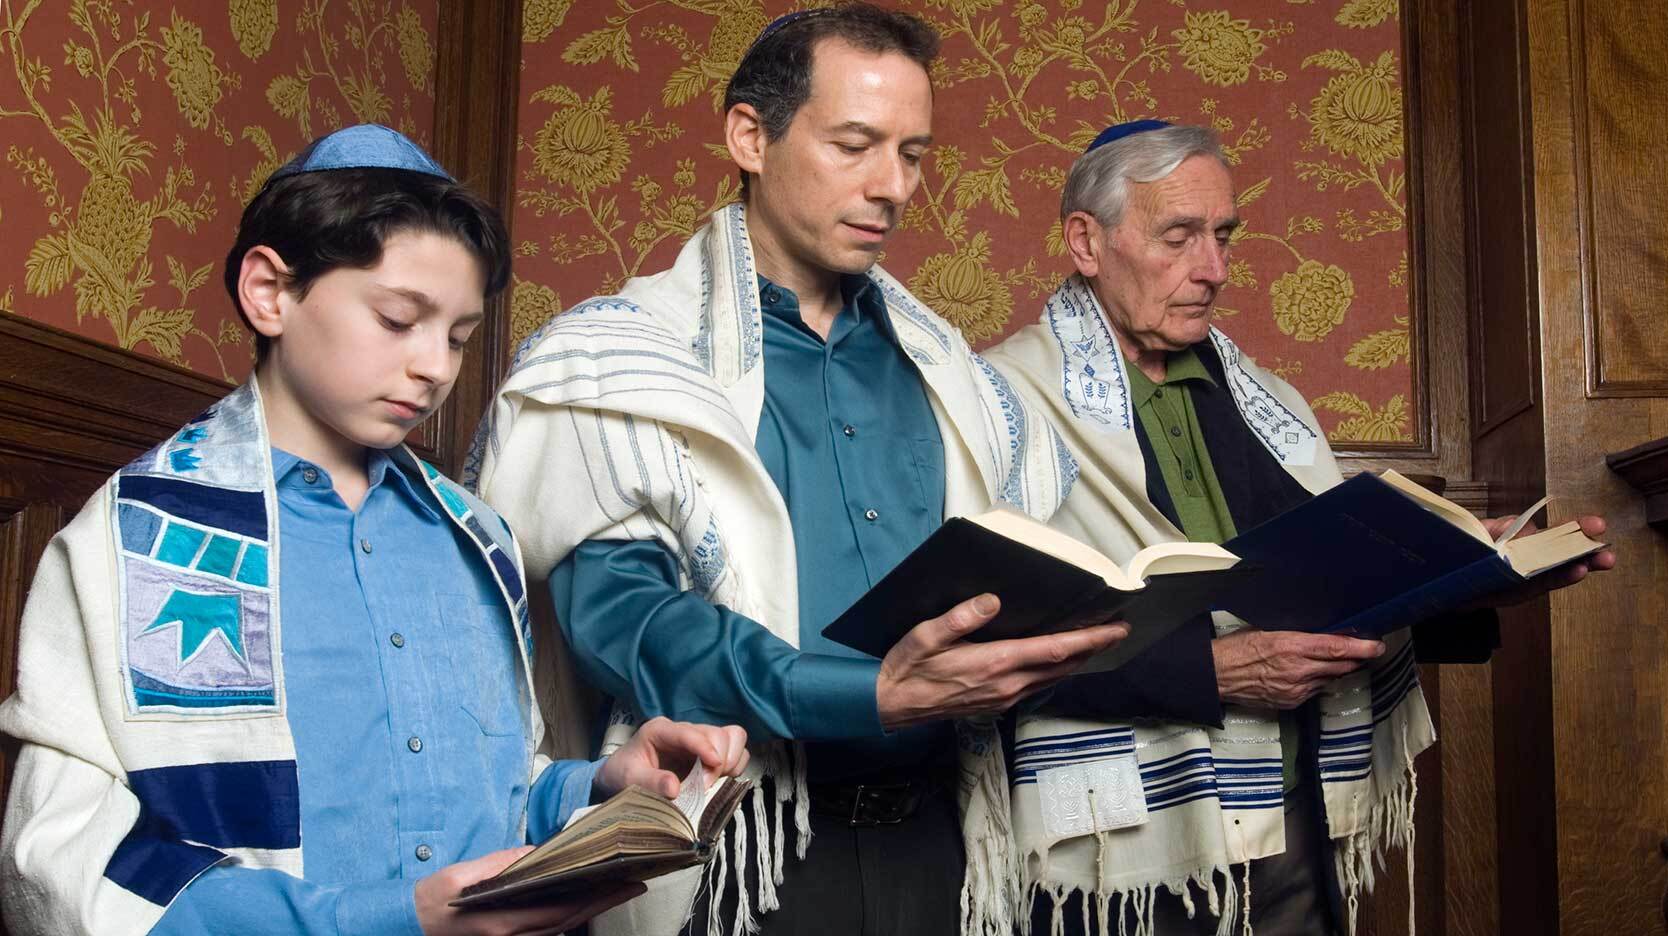 religious social institutions with three generations reading Torah